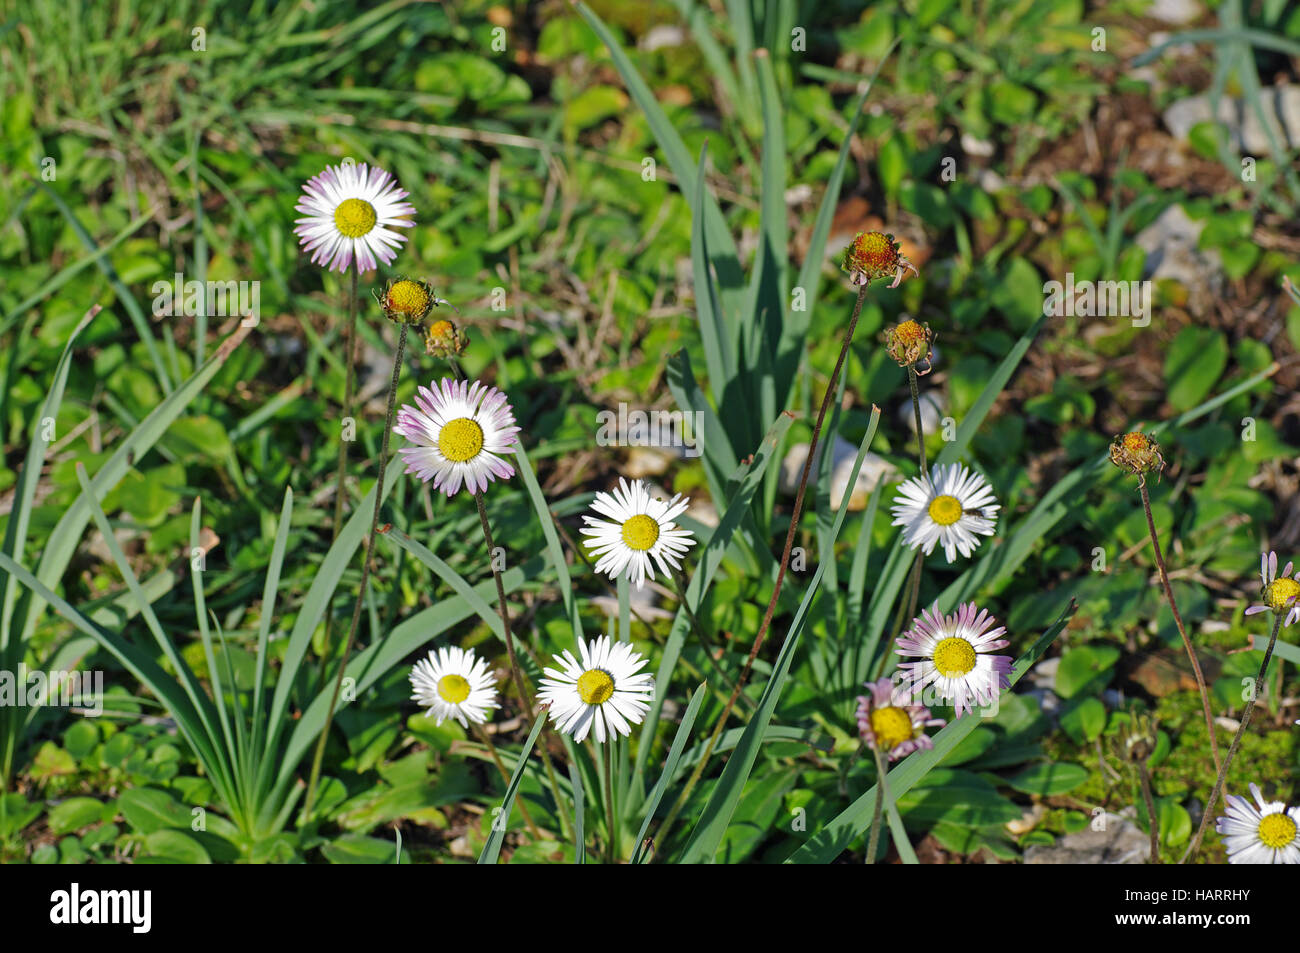 This is Bellis annua, the Annual daisy, which is flowering in autumn. Family Asteraceae, Stock Photo